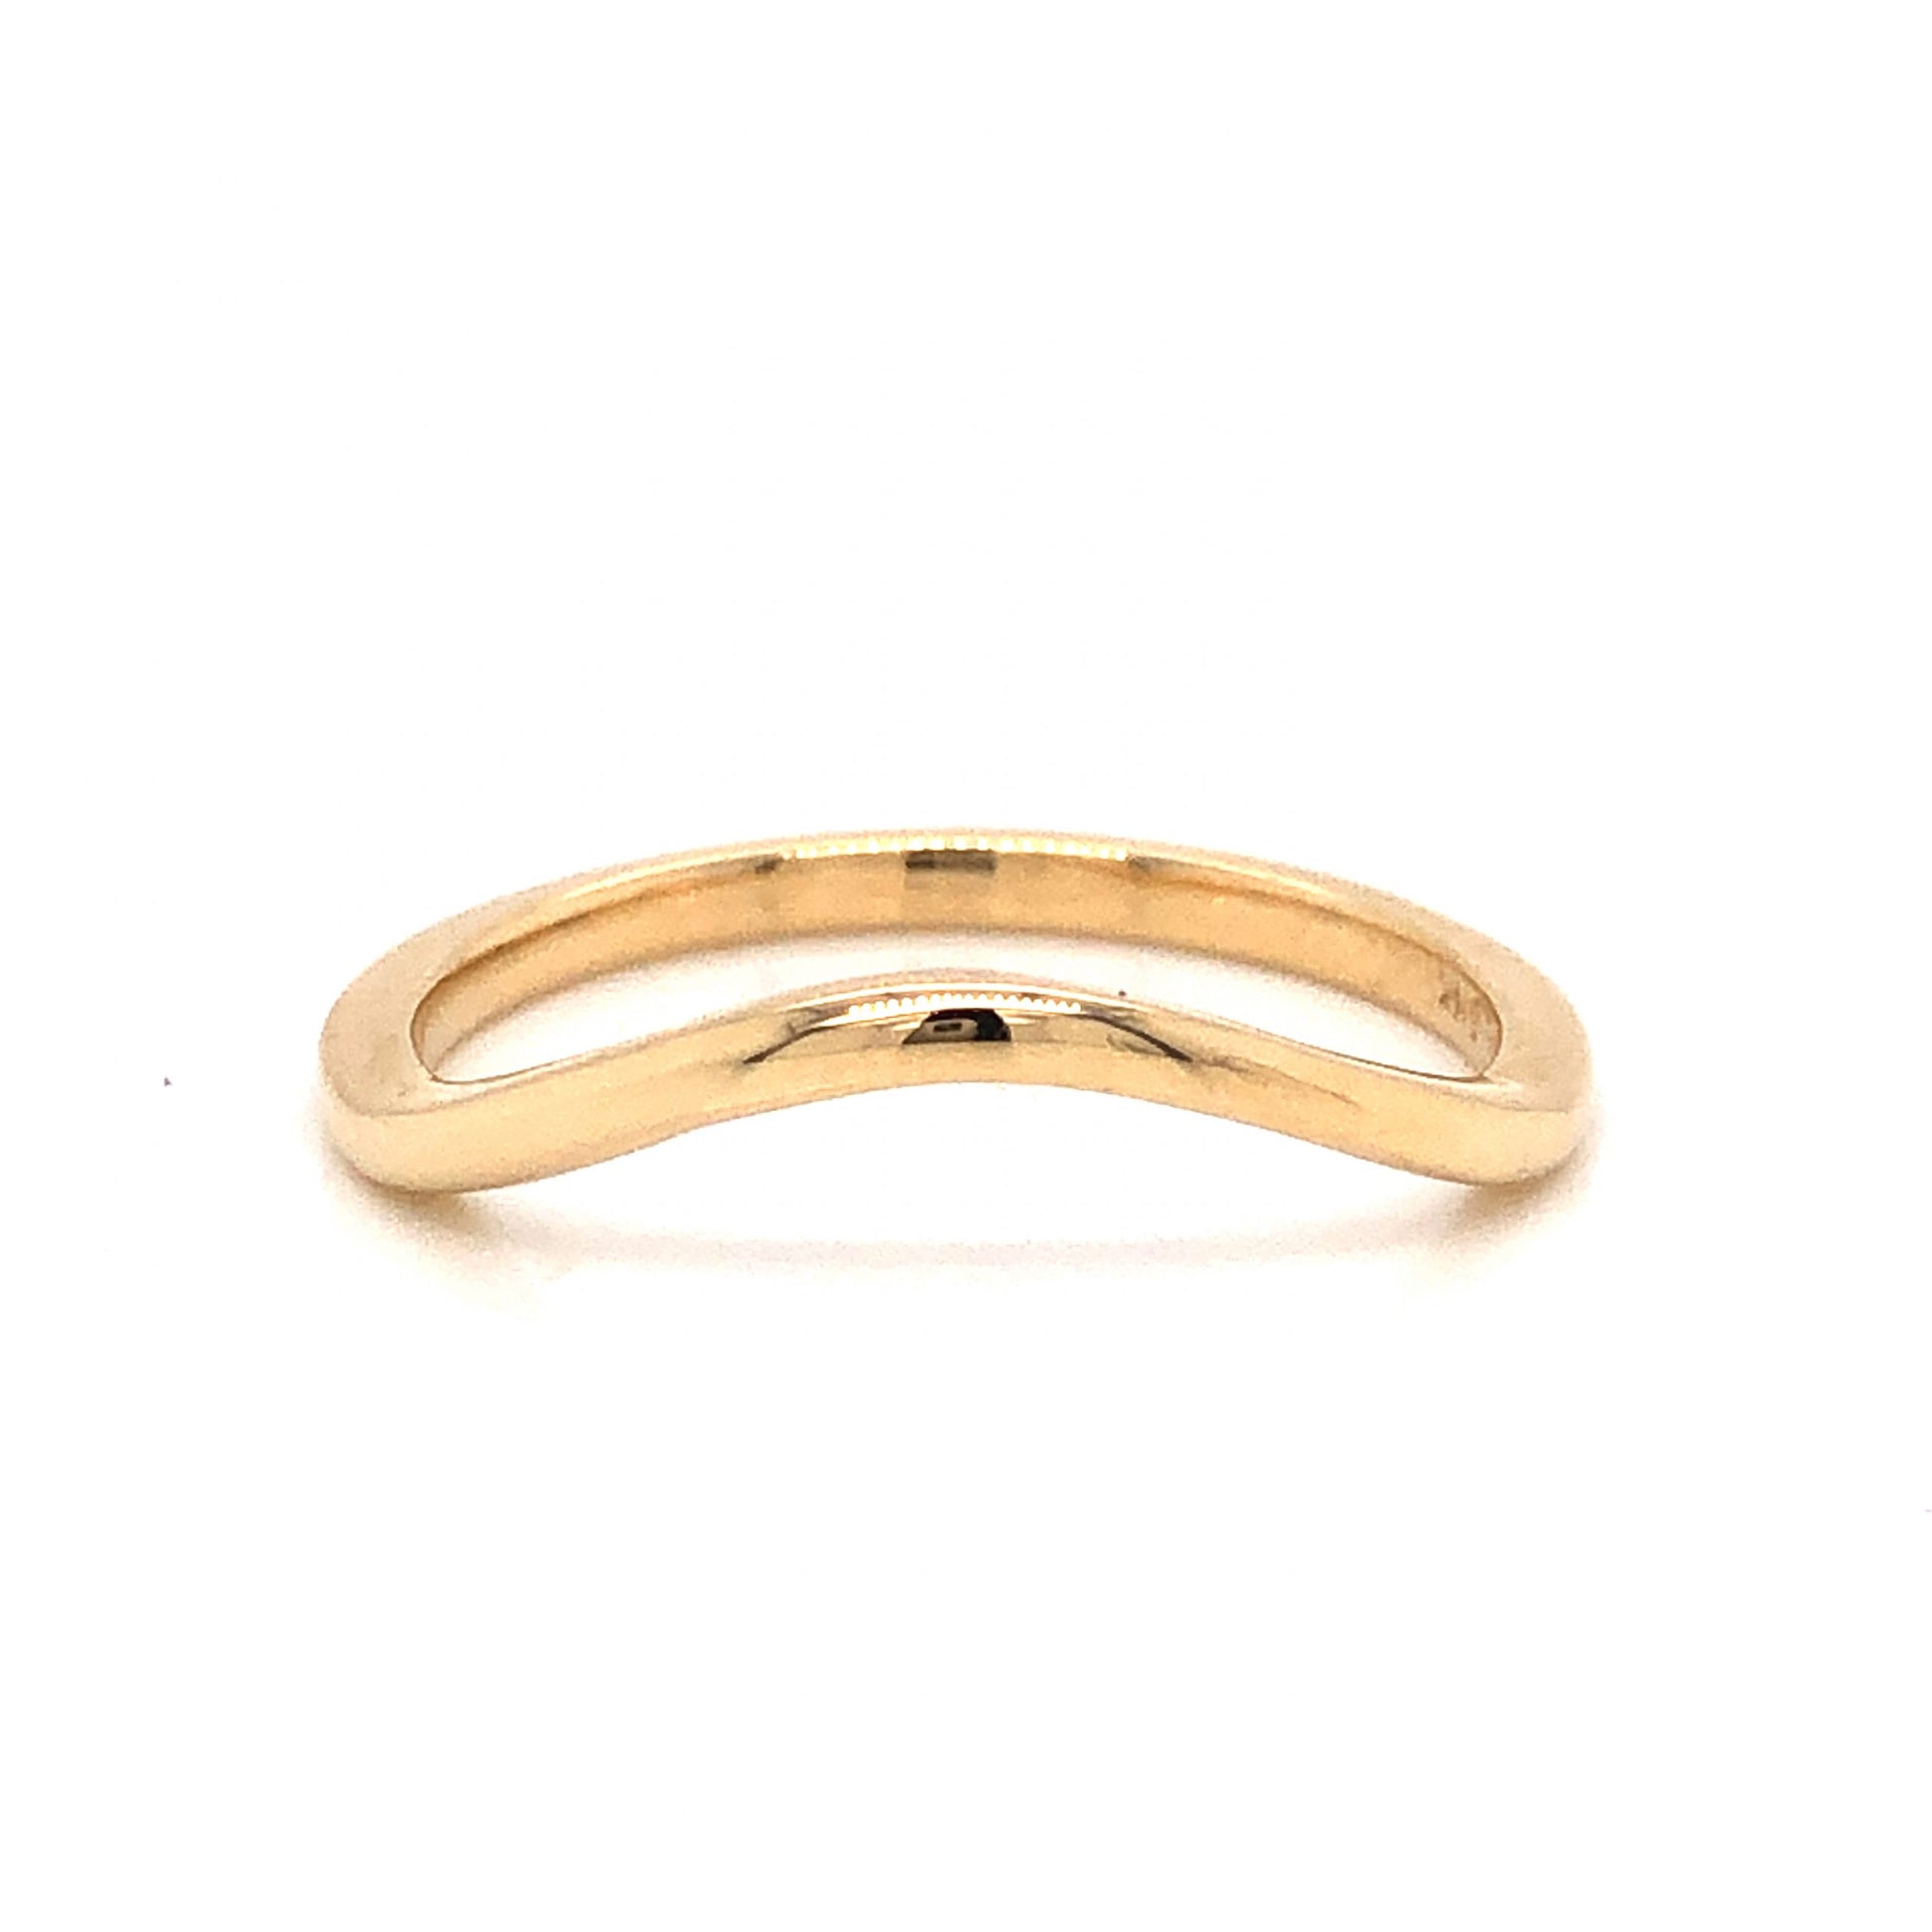 Simple Curved Wedding Band in 14k Yellow GoldComposition: 14 Karat Yellow GoldRing Size: 7.5Total Gram Weight: 2.1 gInscription: 14k